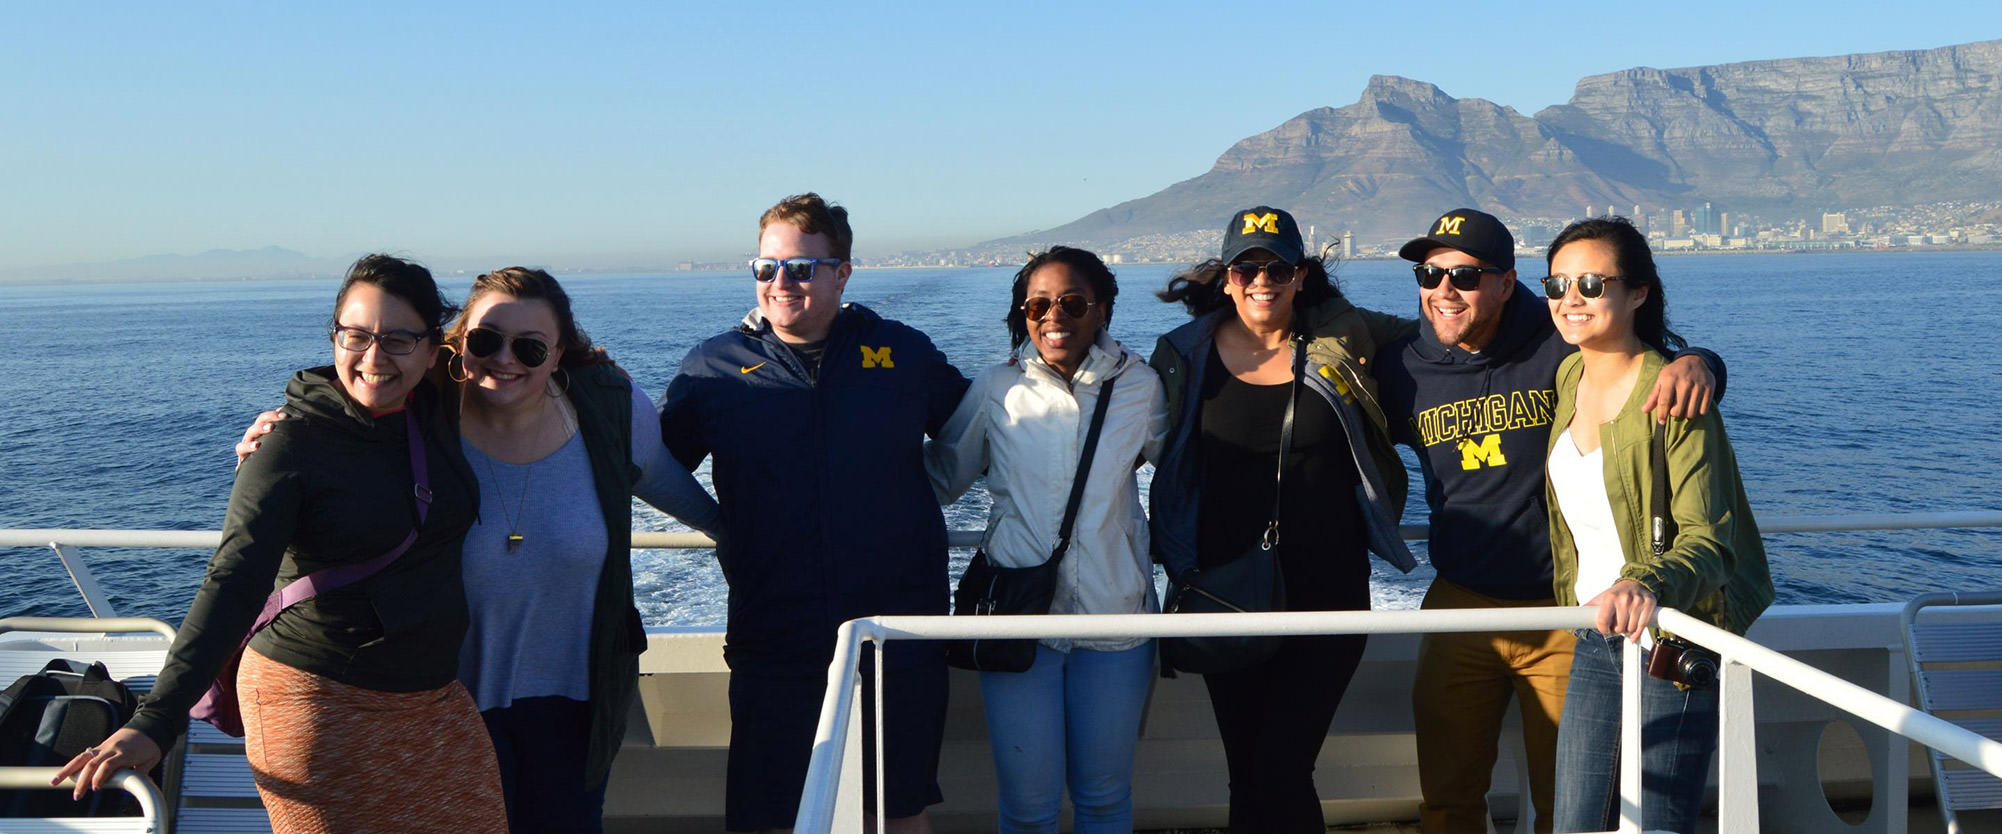 2017 CSHPE study trip group on a boat off the coast of Cape Town, South Africa